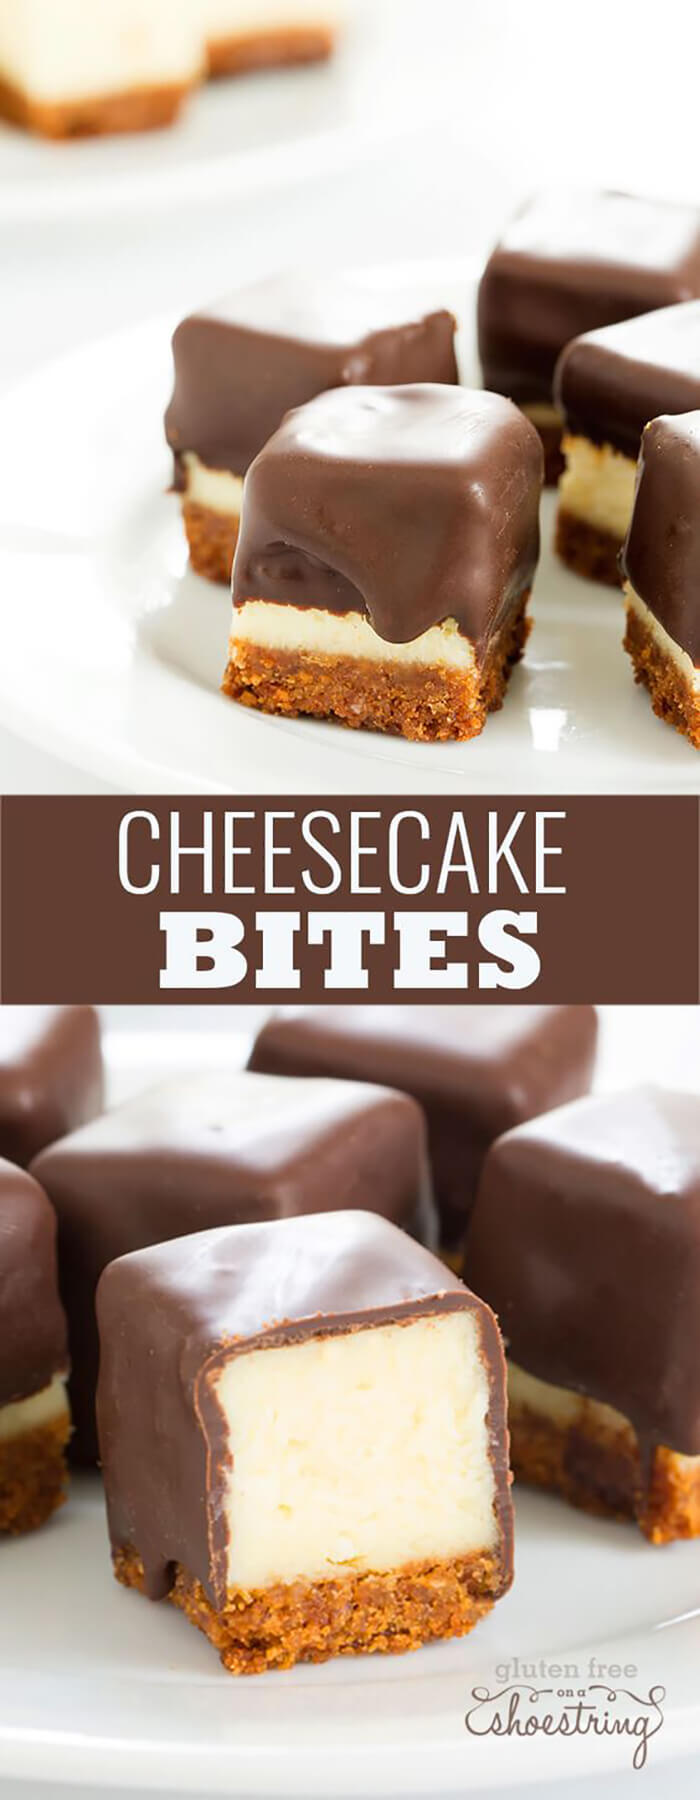 50 Gluten-Free Chocolate Recipes You can’t Live Without